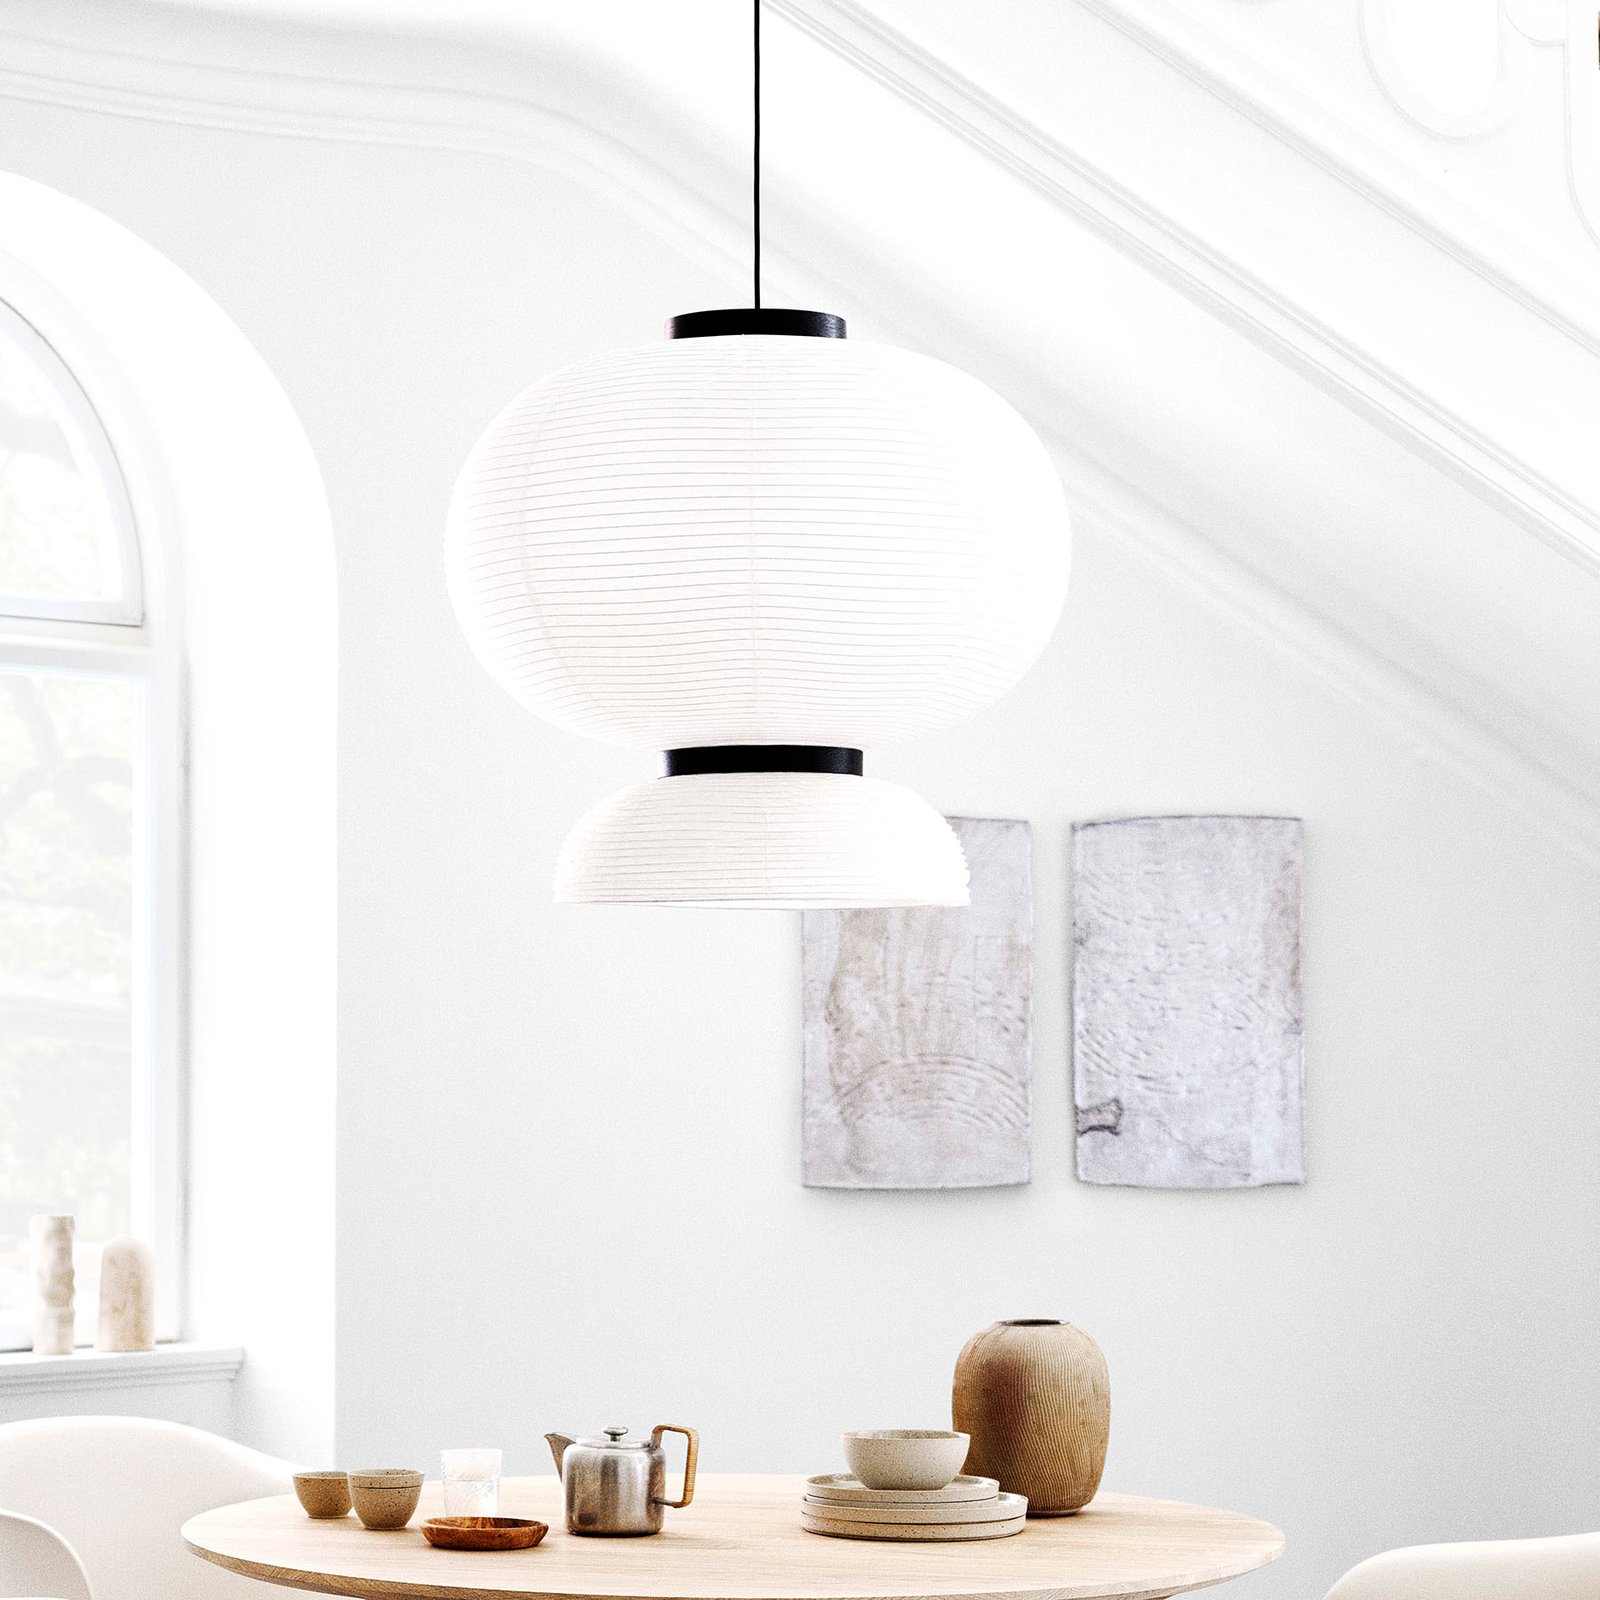 &Tradition Formakami JH3 pendant light